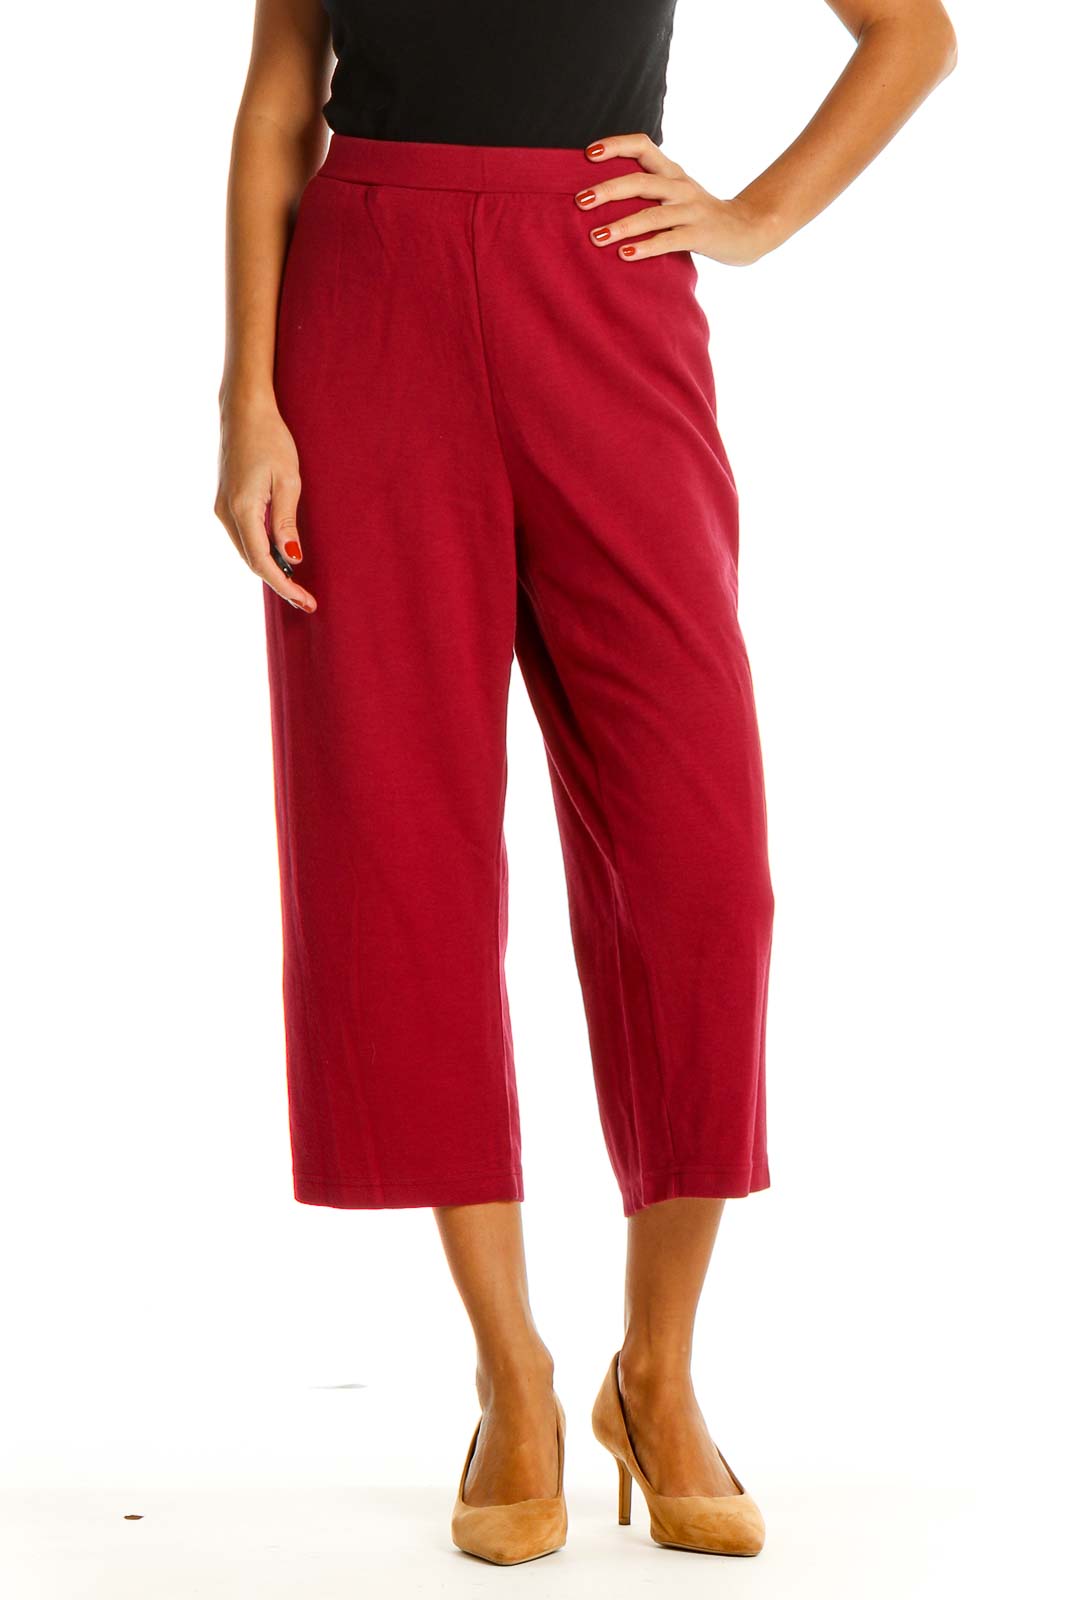 Red Solid All Day Wear Capri Pants Front